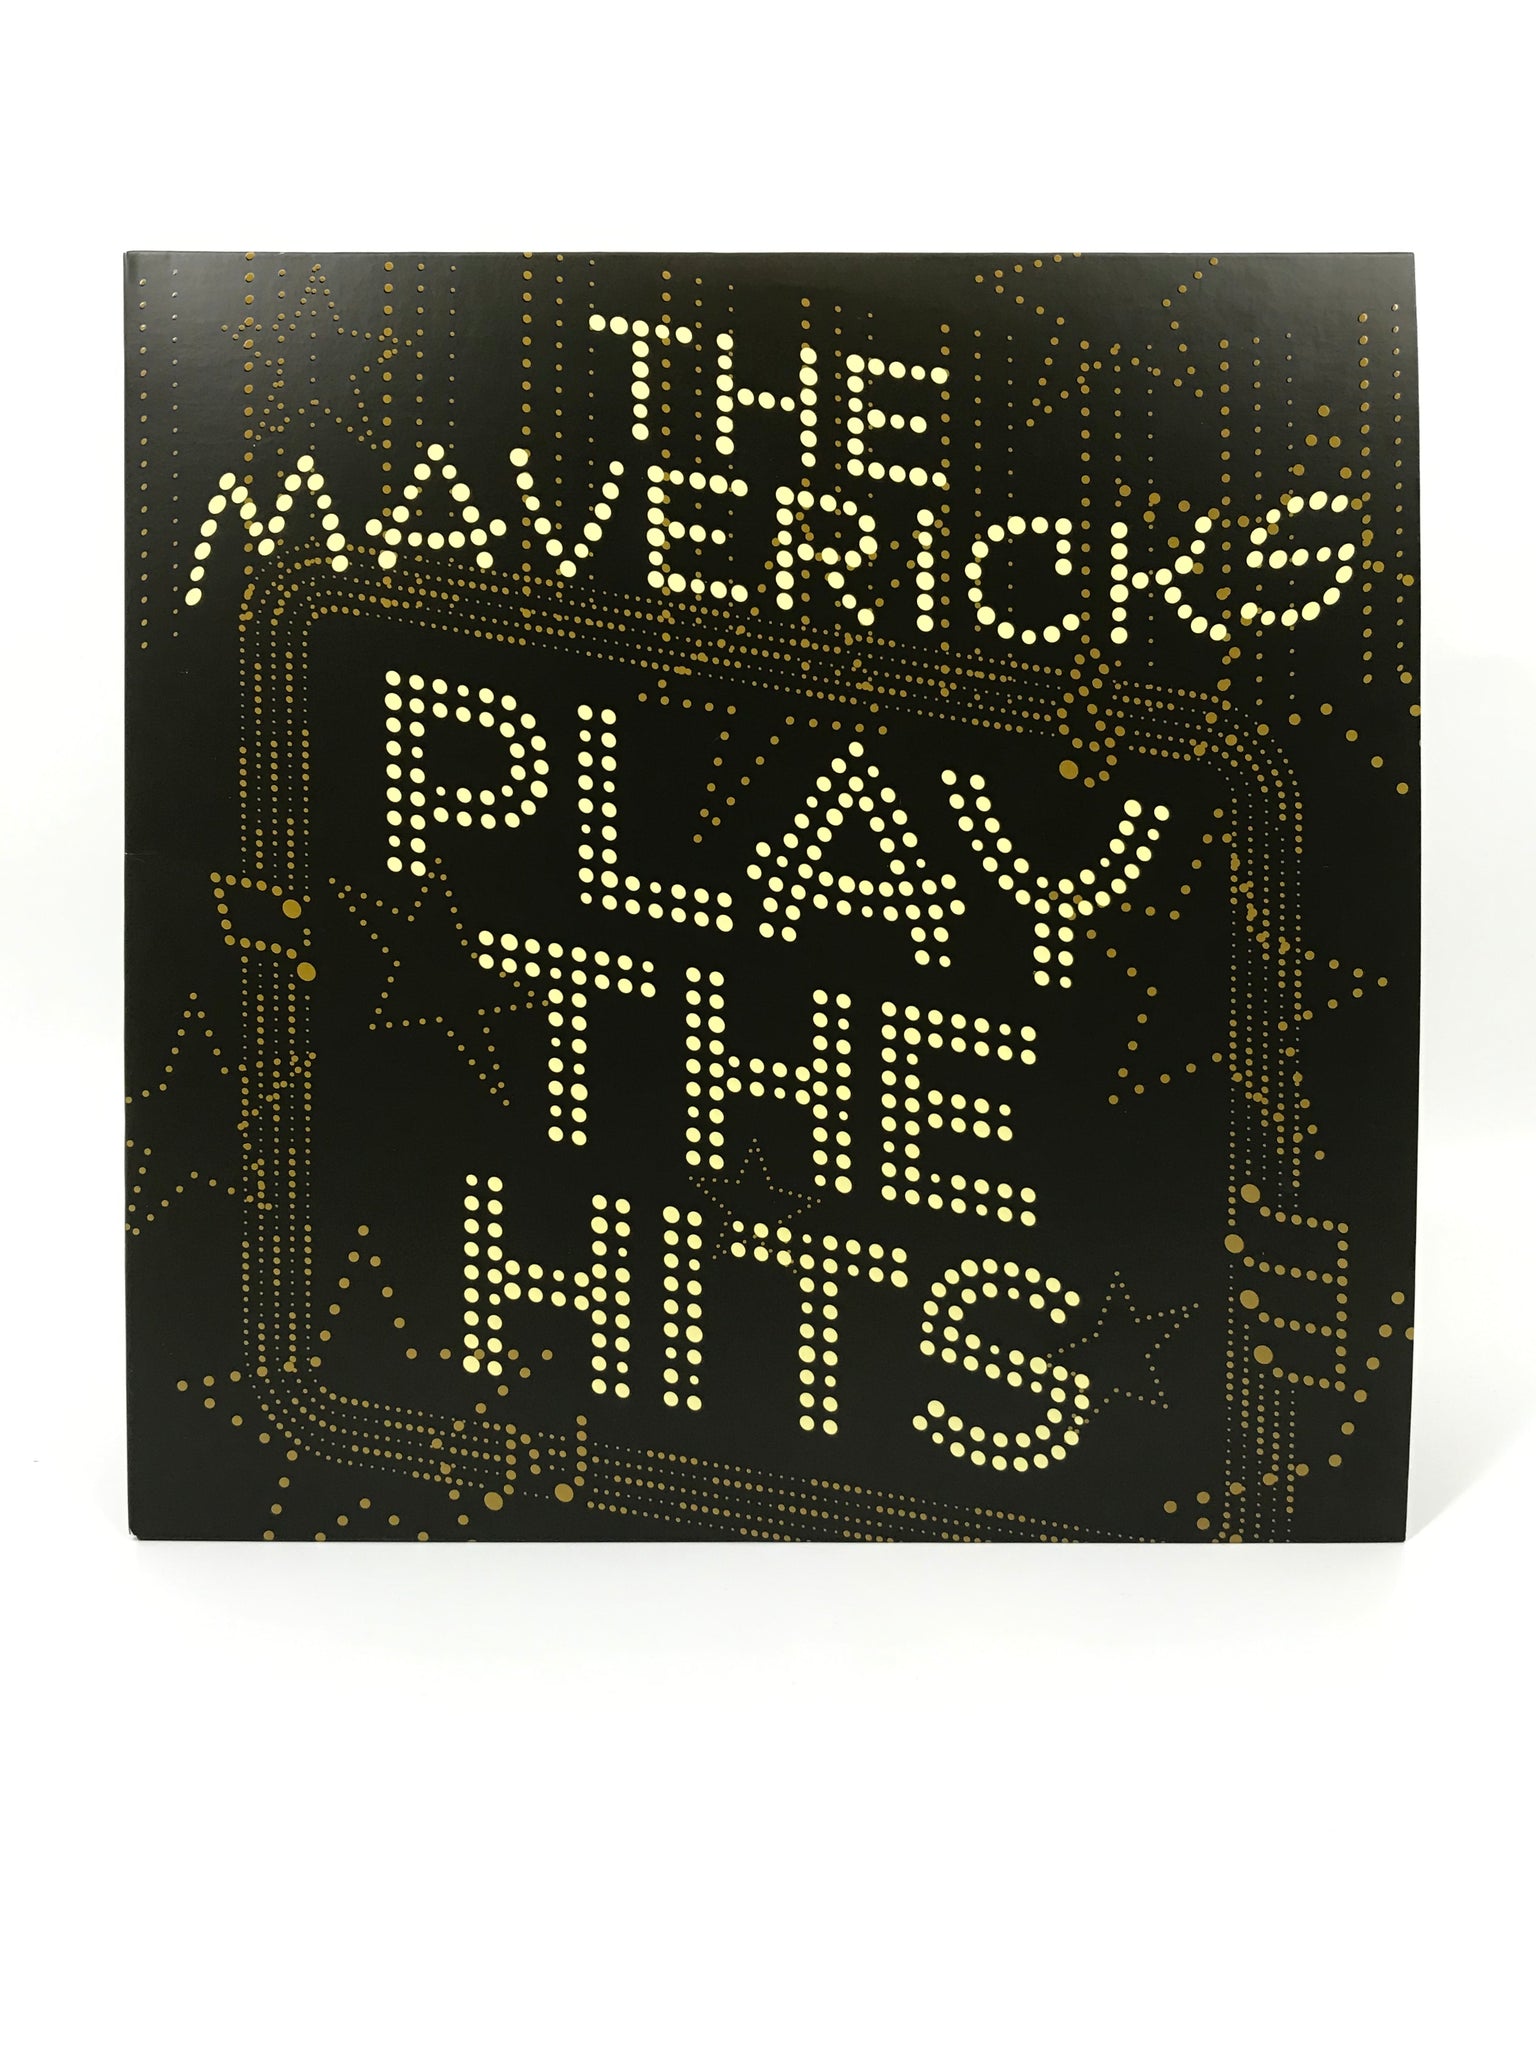 Autographed Play The Hits Limited Edition Gold Vinyl